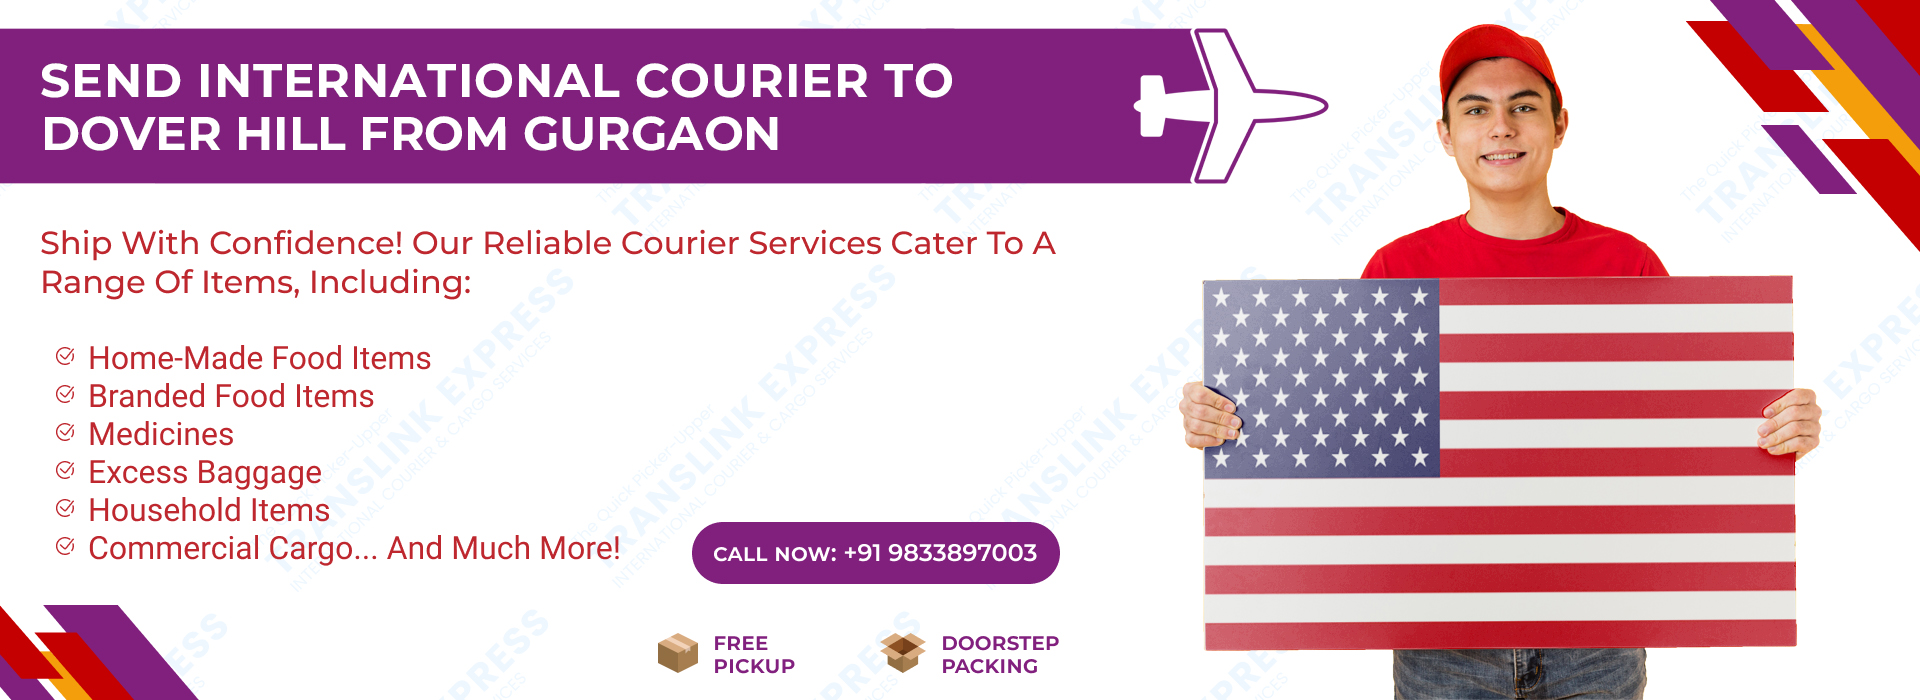 Courier to Dover Hill From Gurgaon